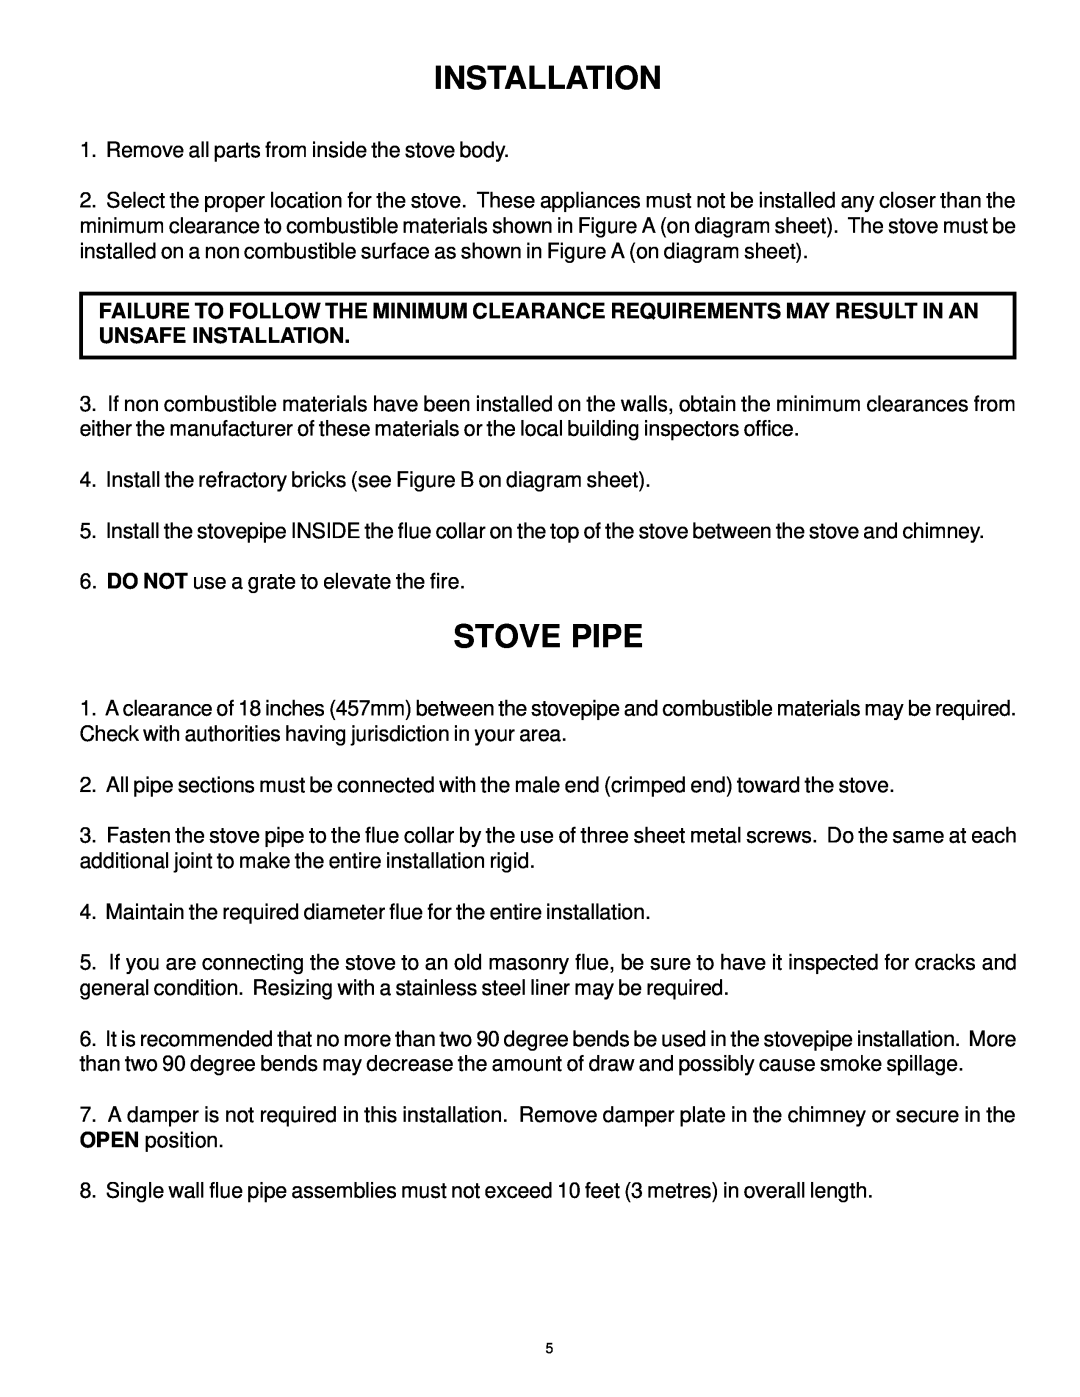 Vermont Casting AIR TIGHT WOOD STOVE owner manual Installation, Stove Pipe 